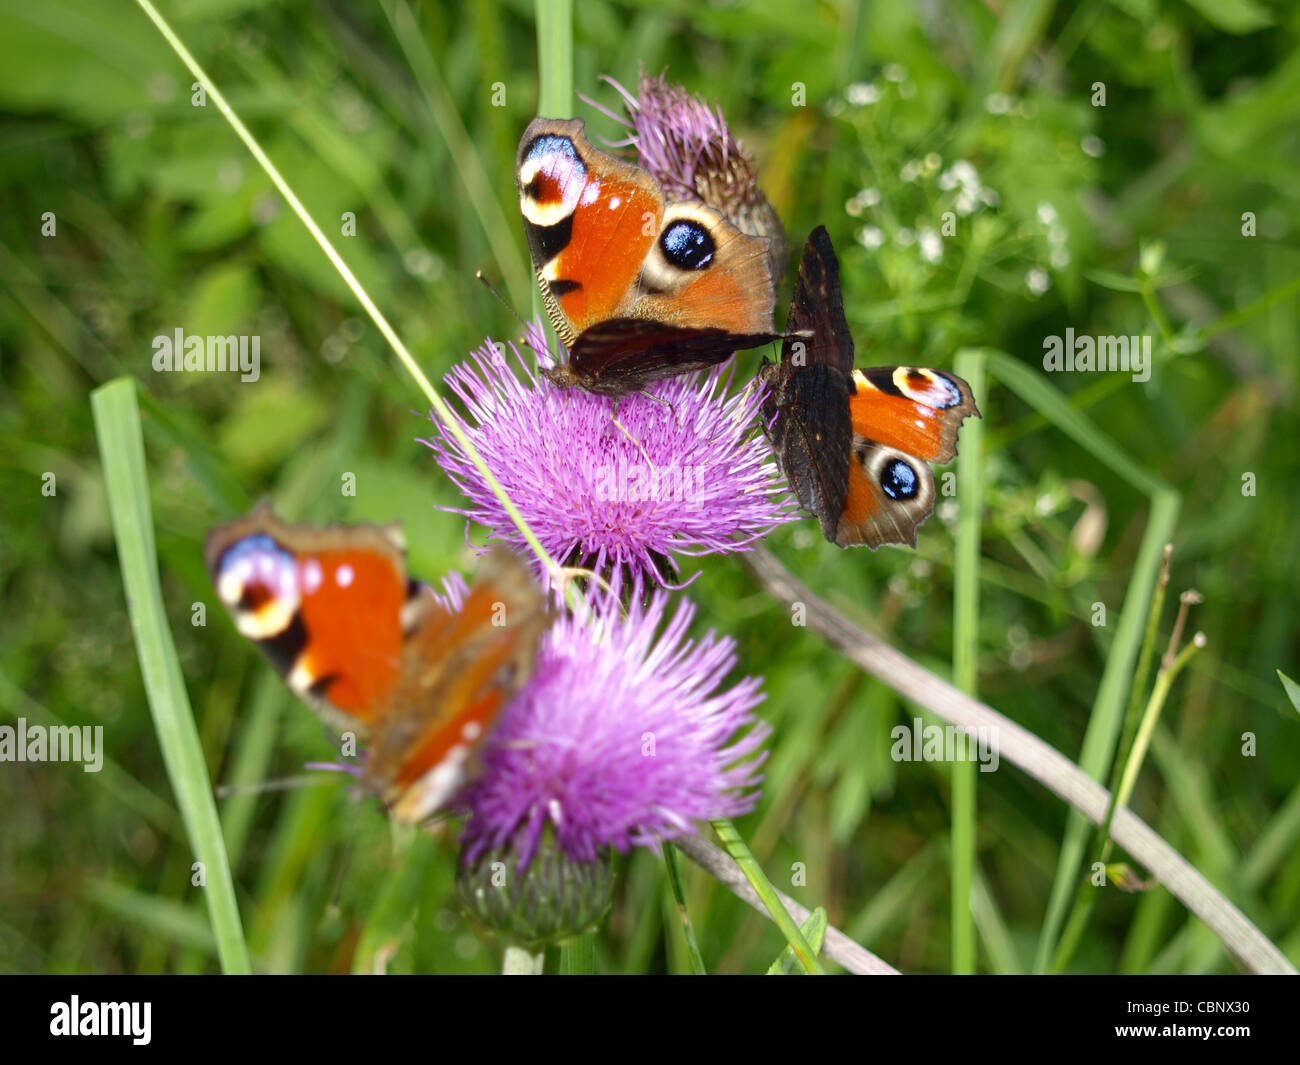 European Peacocl butterfly / Inachis io / Tagpfauenauge Stock Photo